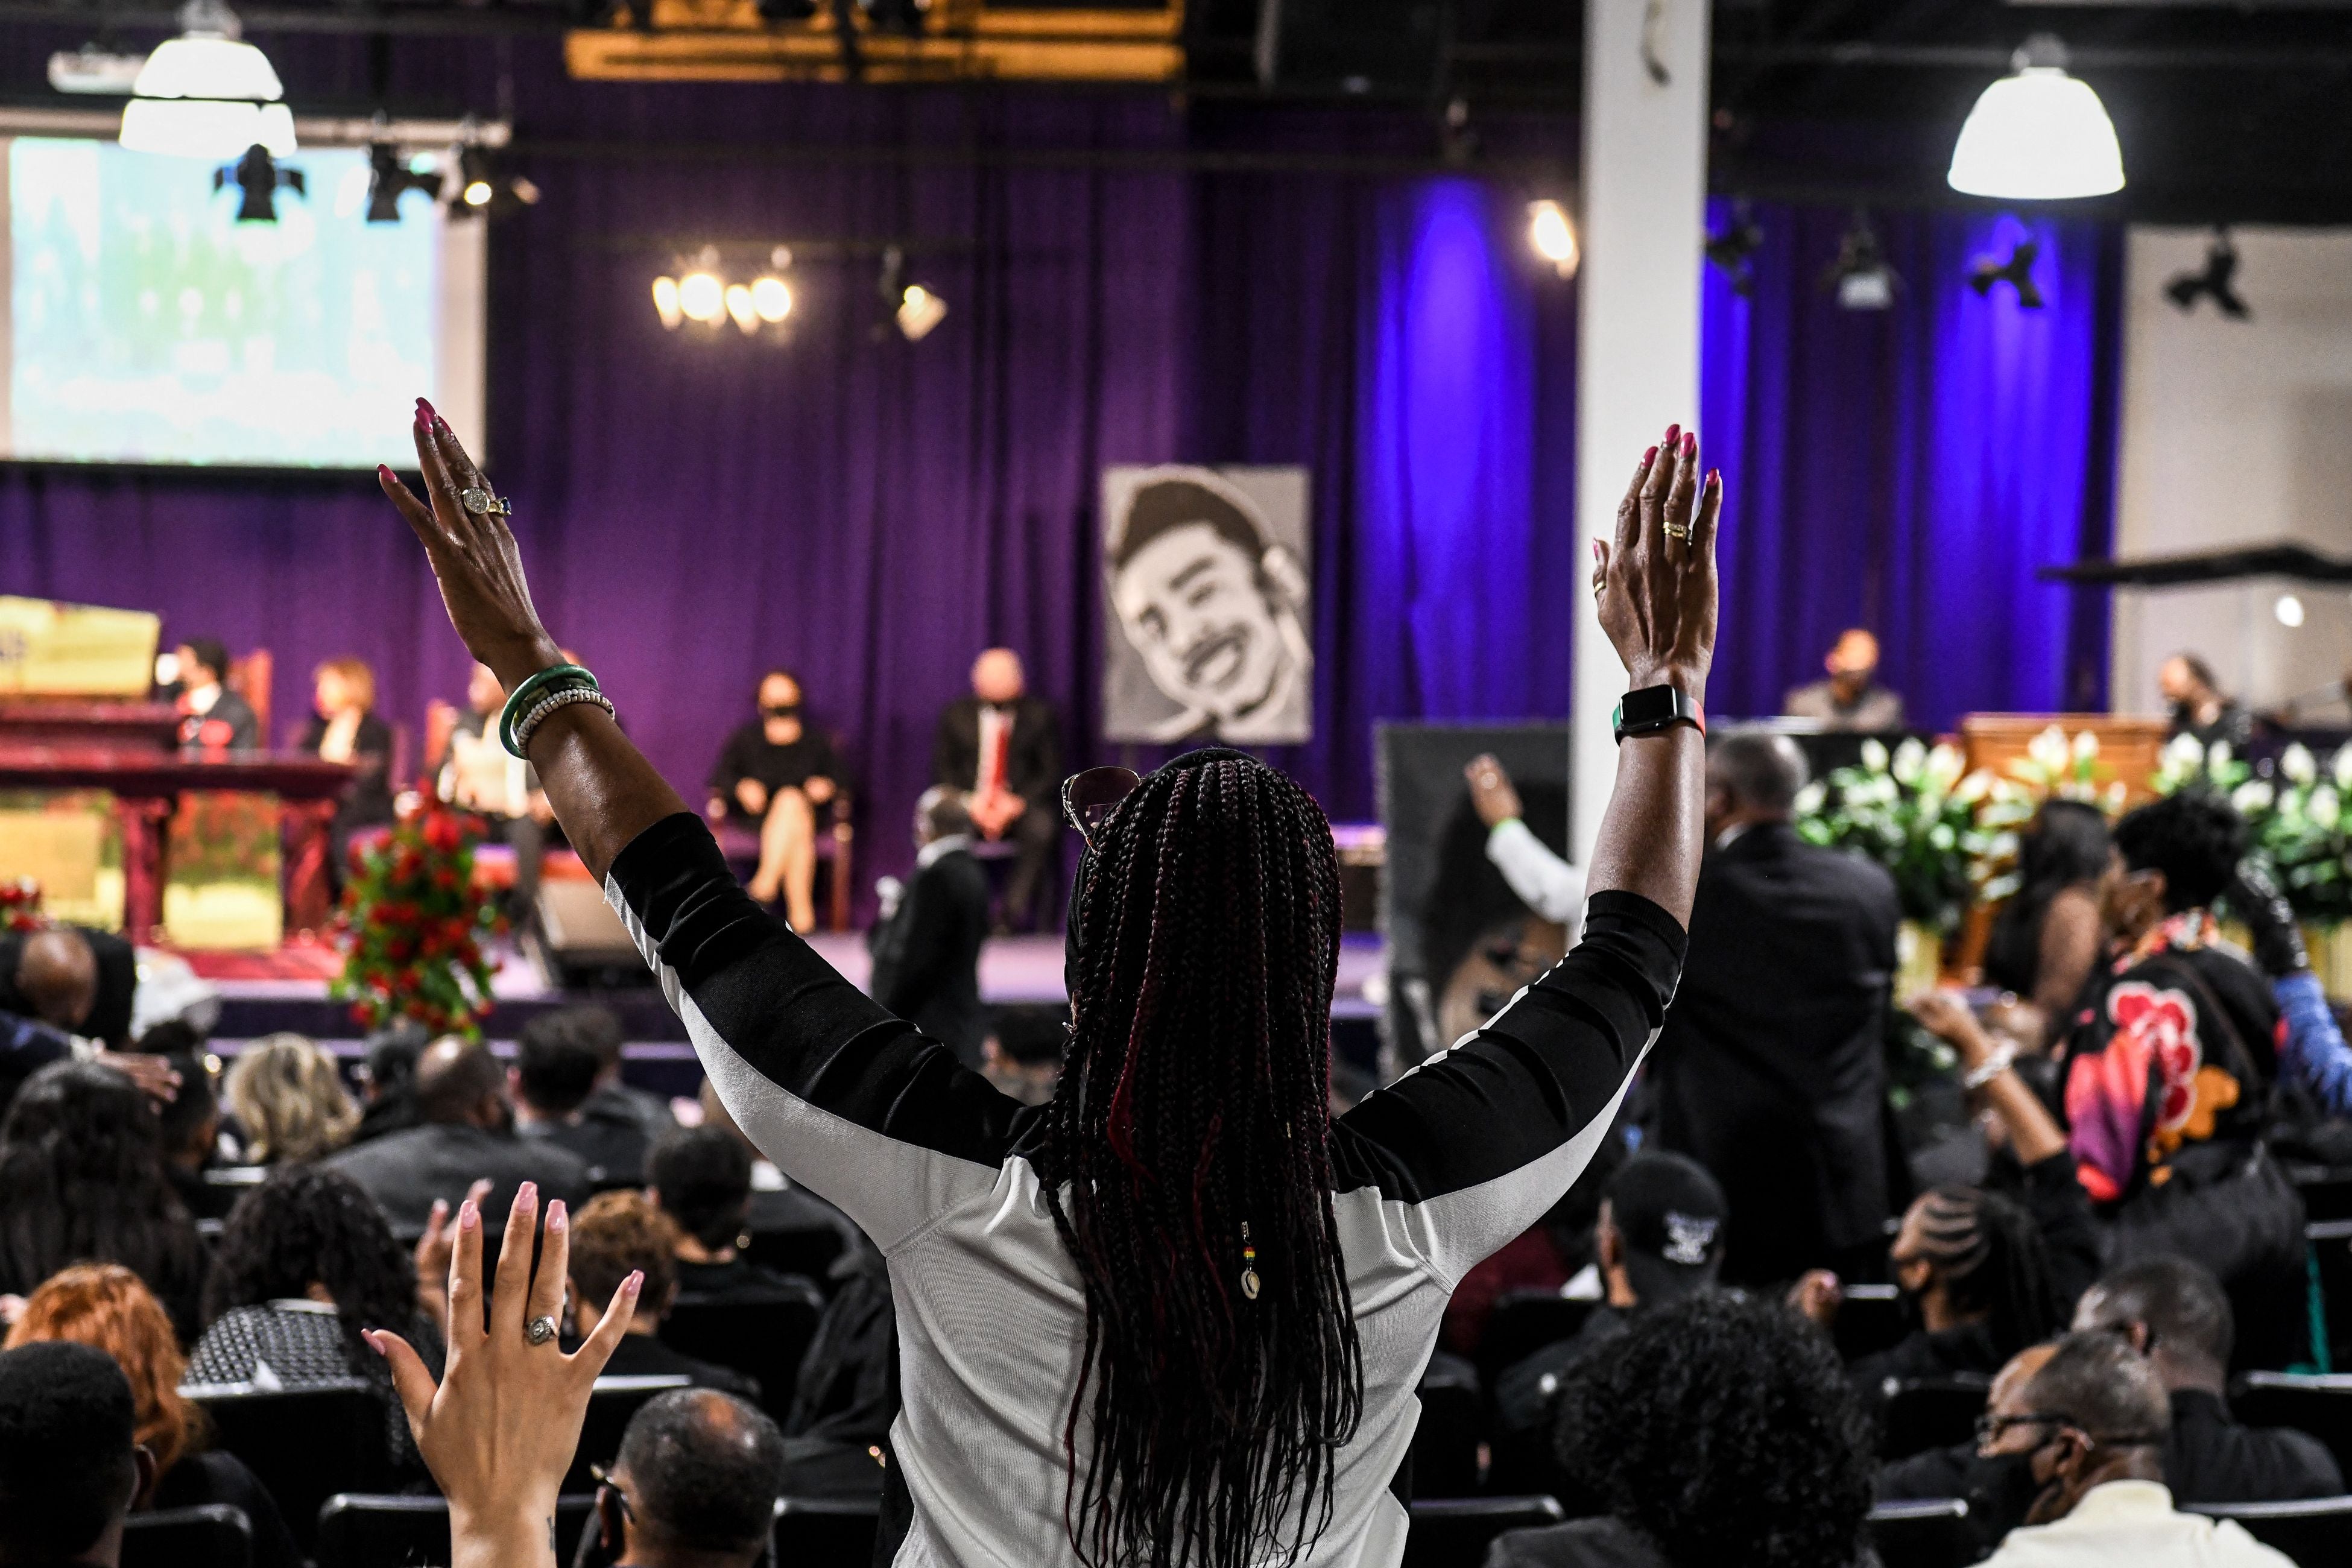 A woman raises her hands as she prays during the funeral of Daunte Wright